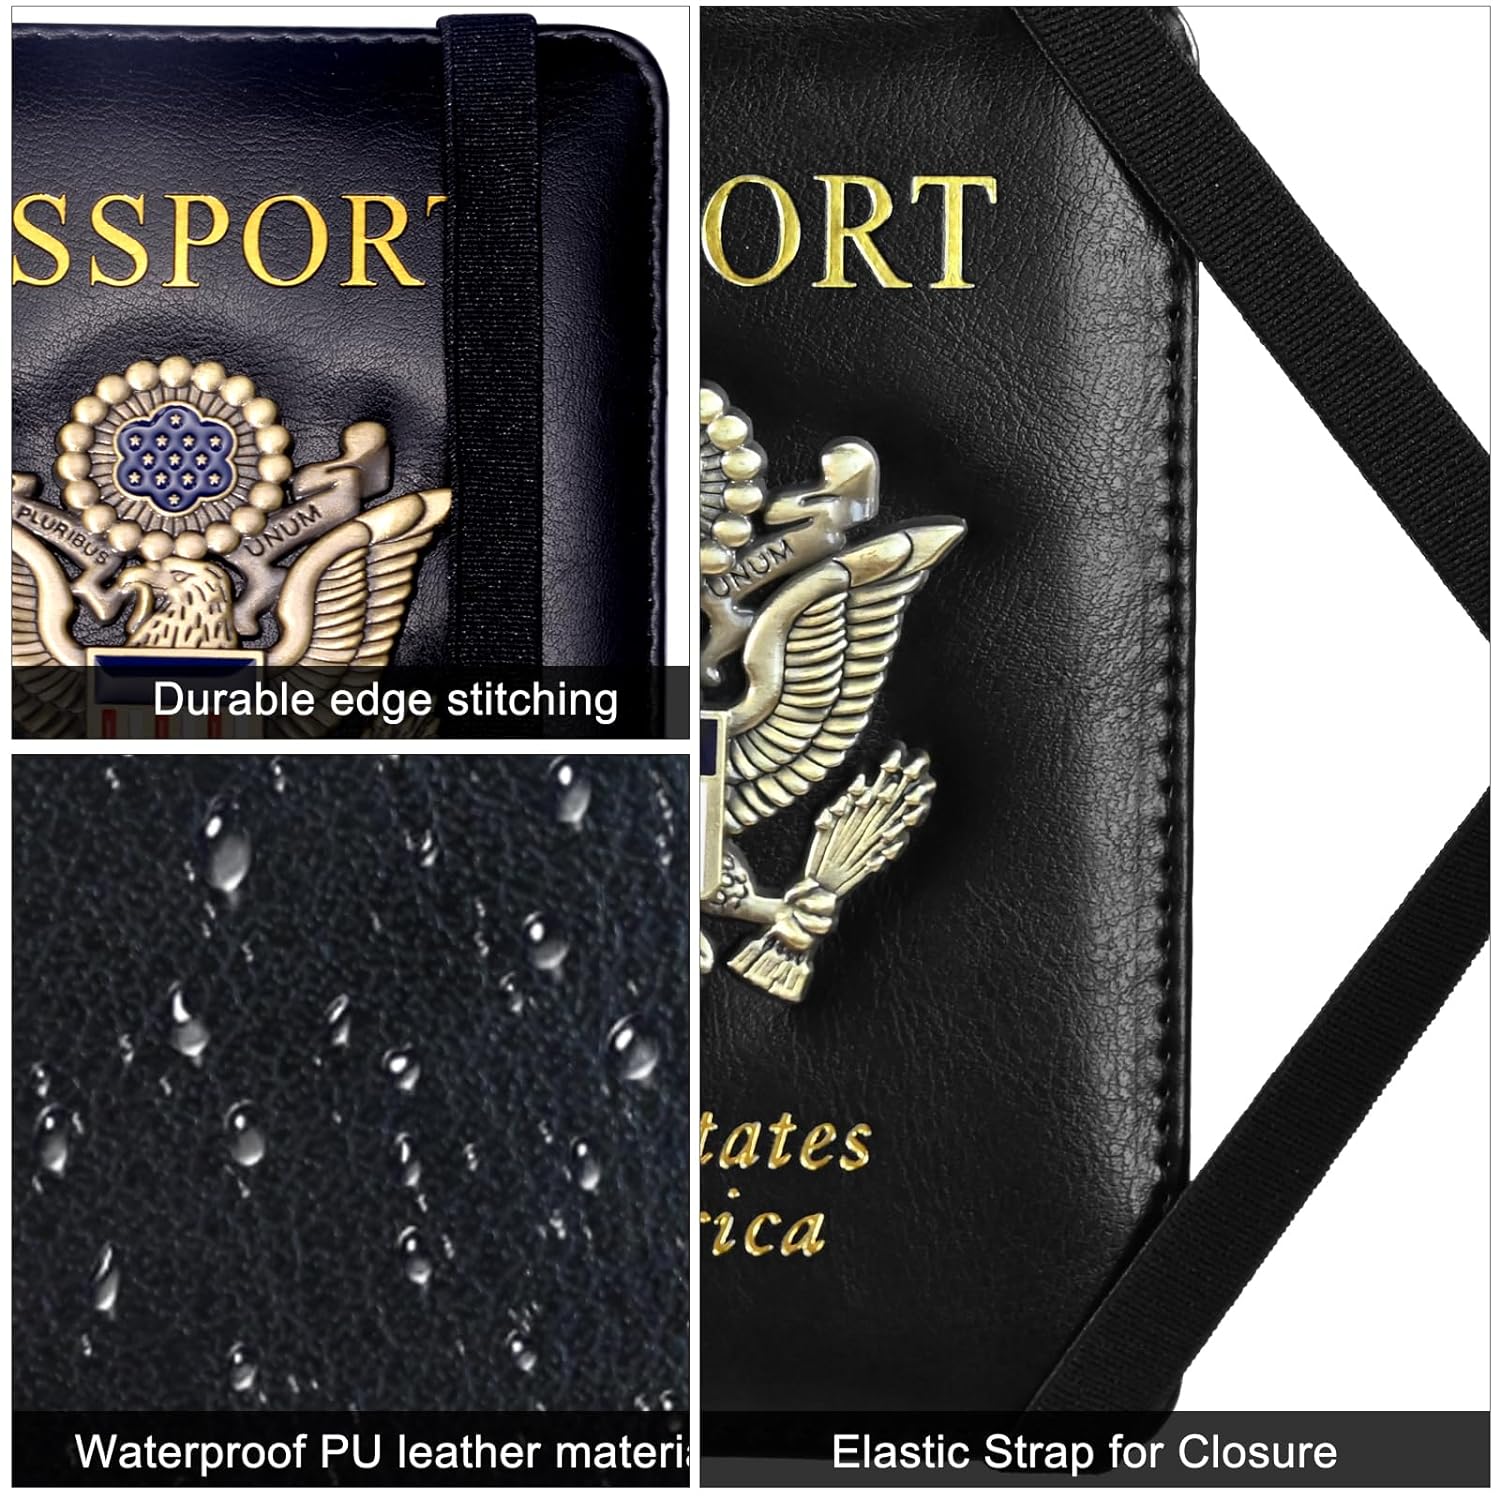 Passport Holder Cover Case with Airtag, Travel Passport Book Wallet and Vaccine Card Holder Combo, US ID Badge Porta Pasaporte with RFID Blocking, Leather Document Organizer for Men Women Kids, Black, Polished Leather Surfaces